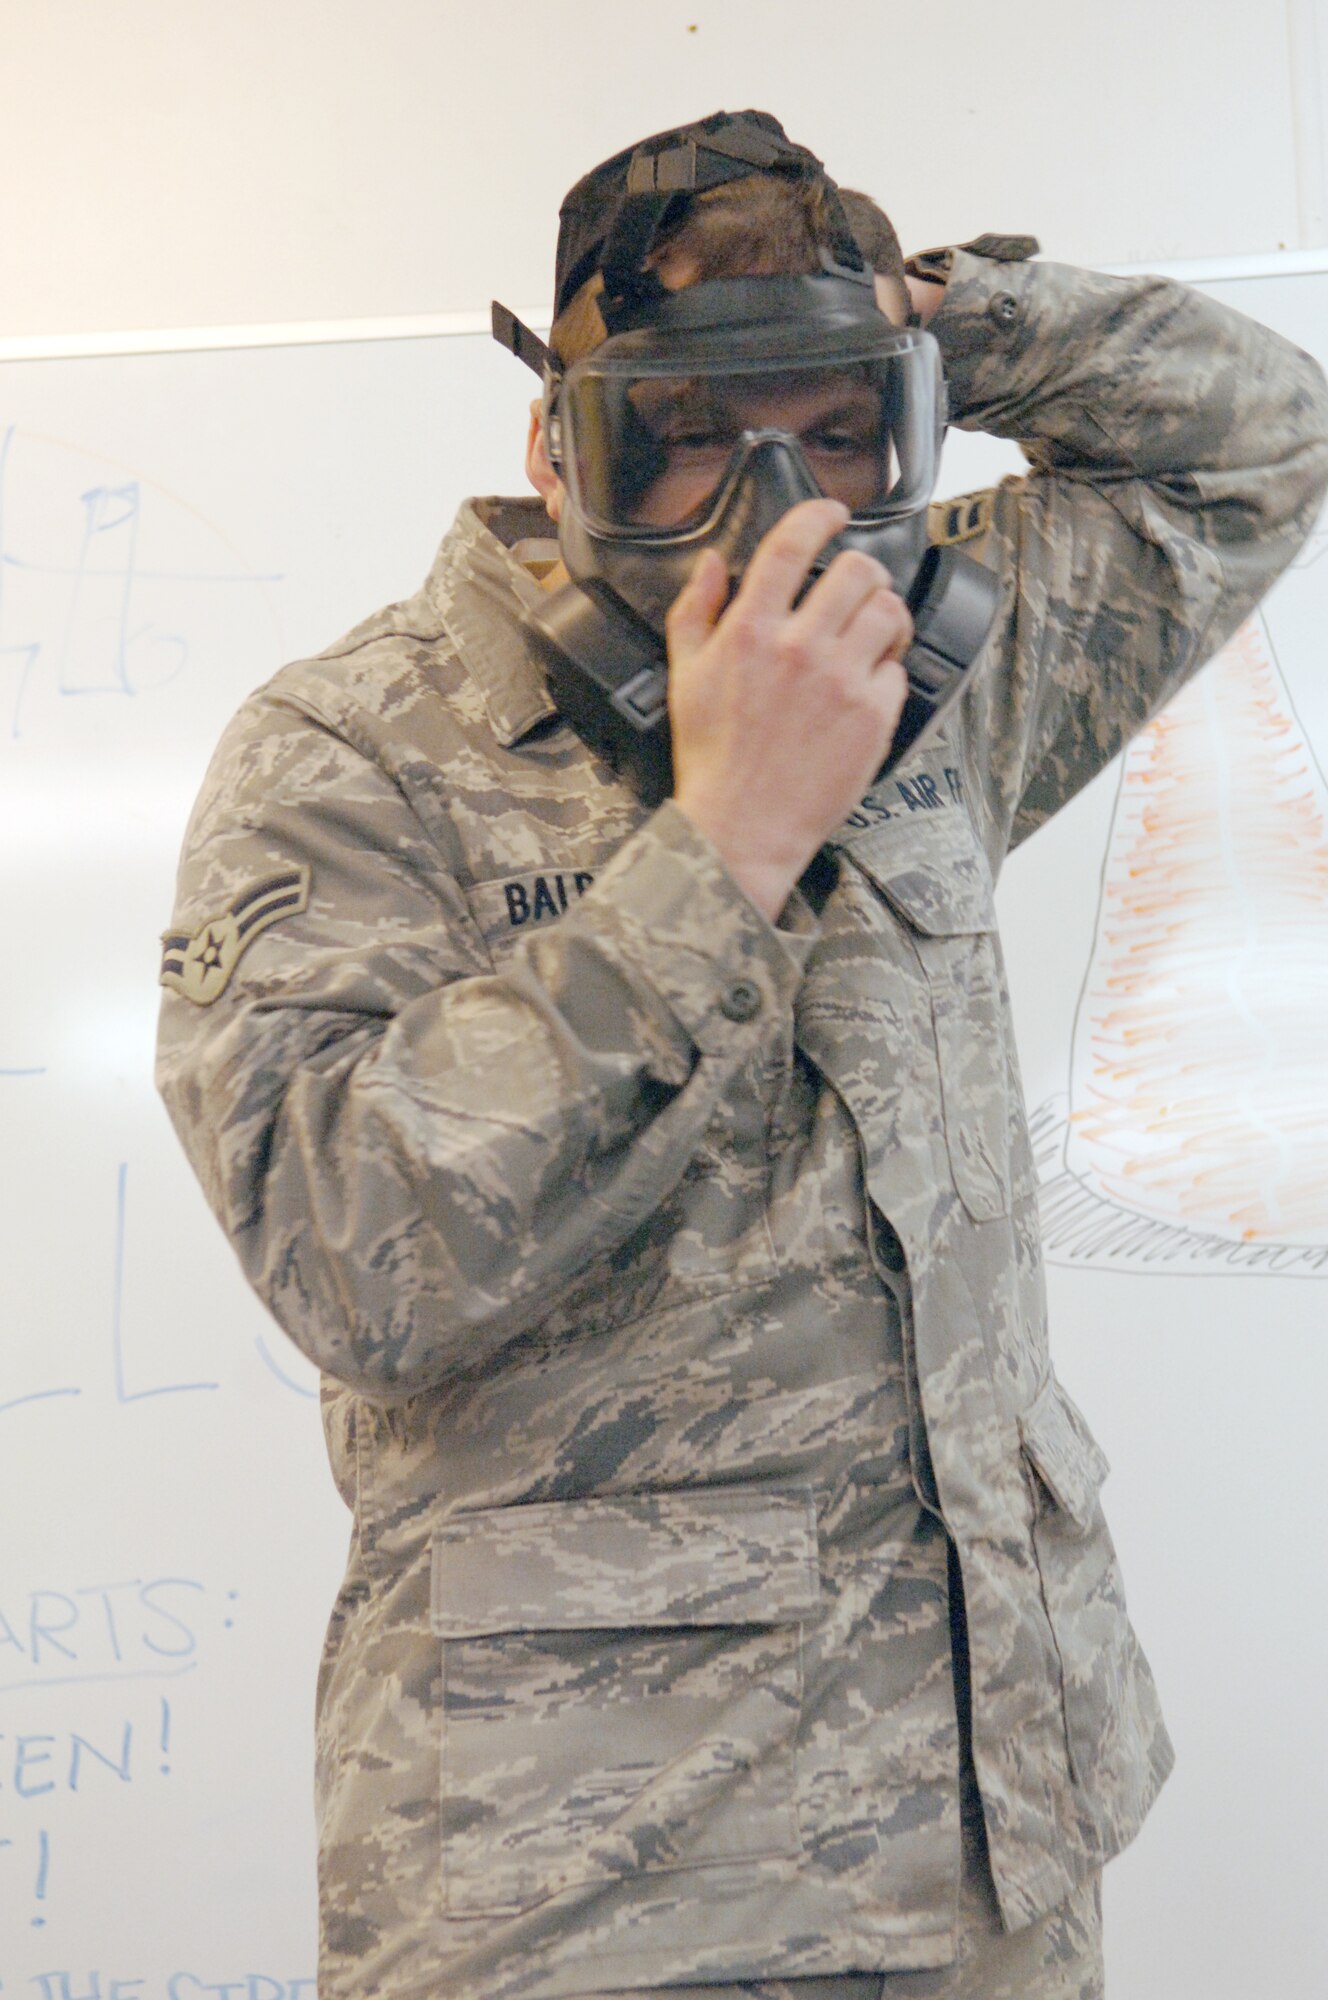 U.S. Air Force Airman 1st Class Michael Balbaugh, 886th Civil Engineer Squadron readiness and emergency management apprentice, demonstrates how to put on the M-50 Joint Service General Purpose Mask, Nov. 5, 2009, Ramstein Air Base, Germany. The mask has a redesigned head harness that allows for a better seal around the face.  (U.S. Air Force photo by Senior Airman Amanda Dick)